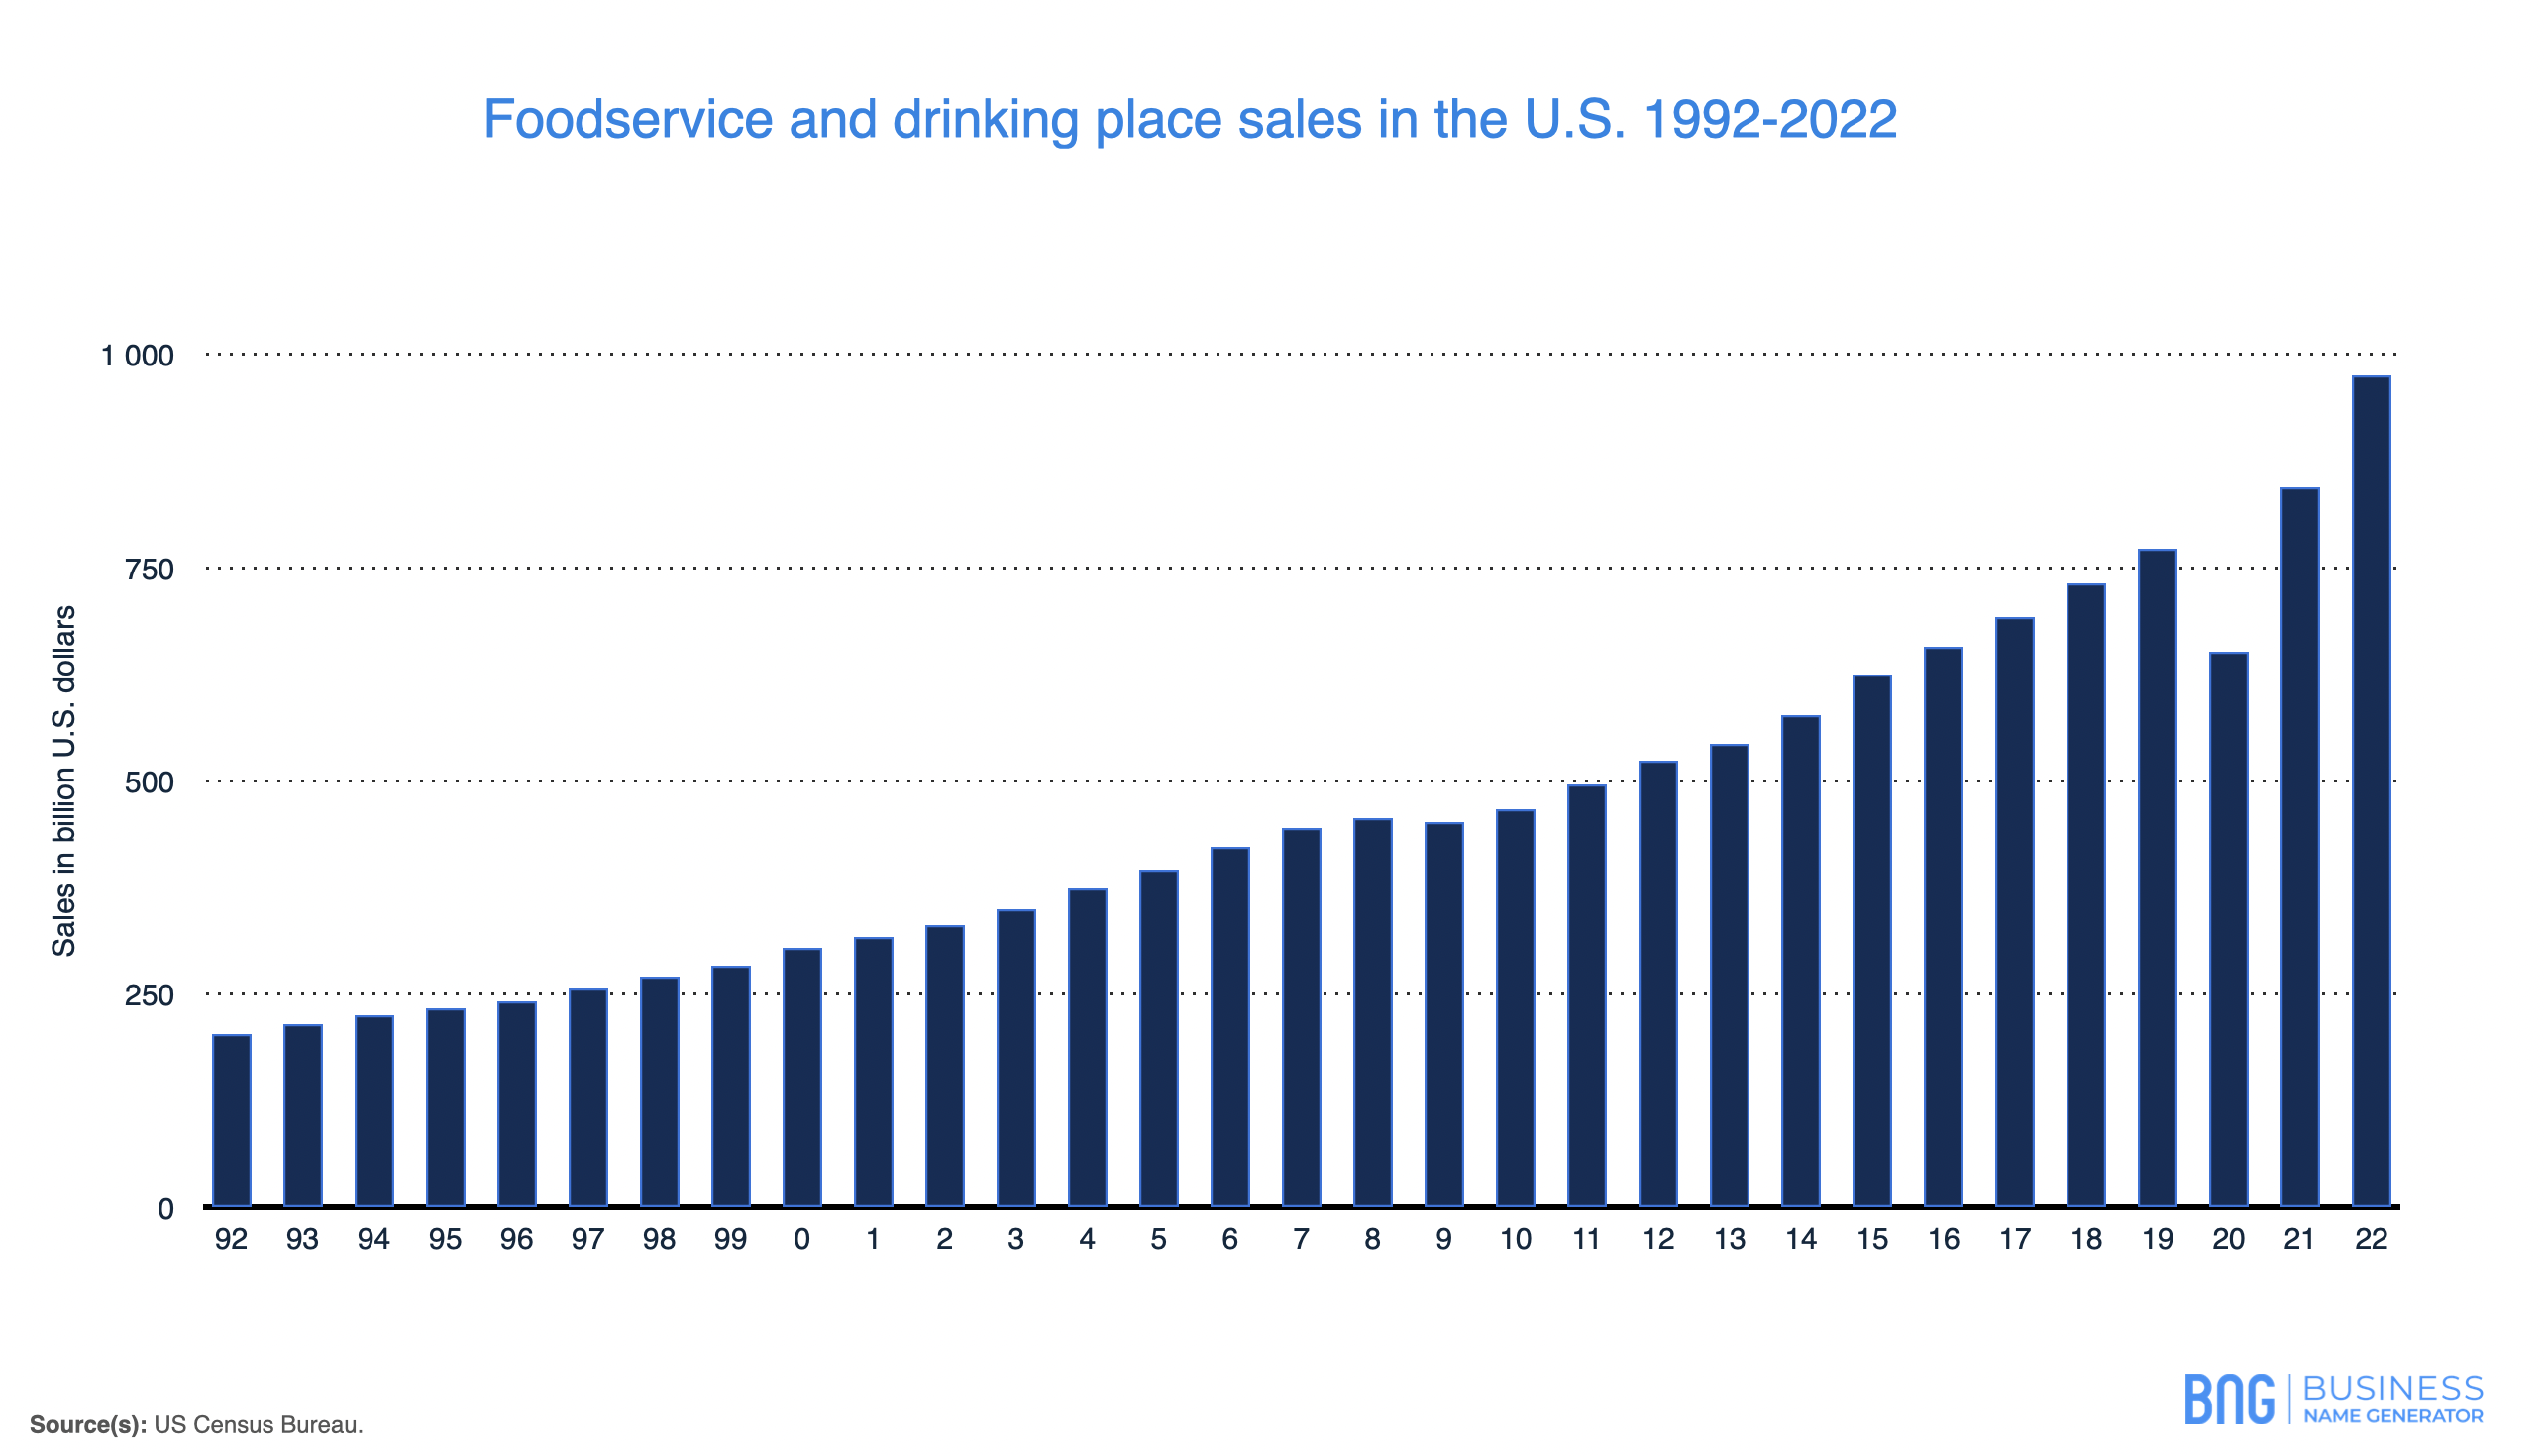 graph for foodservice and drinking place sales in the US 1992-2022